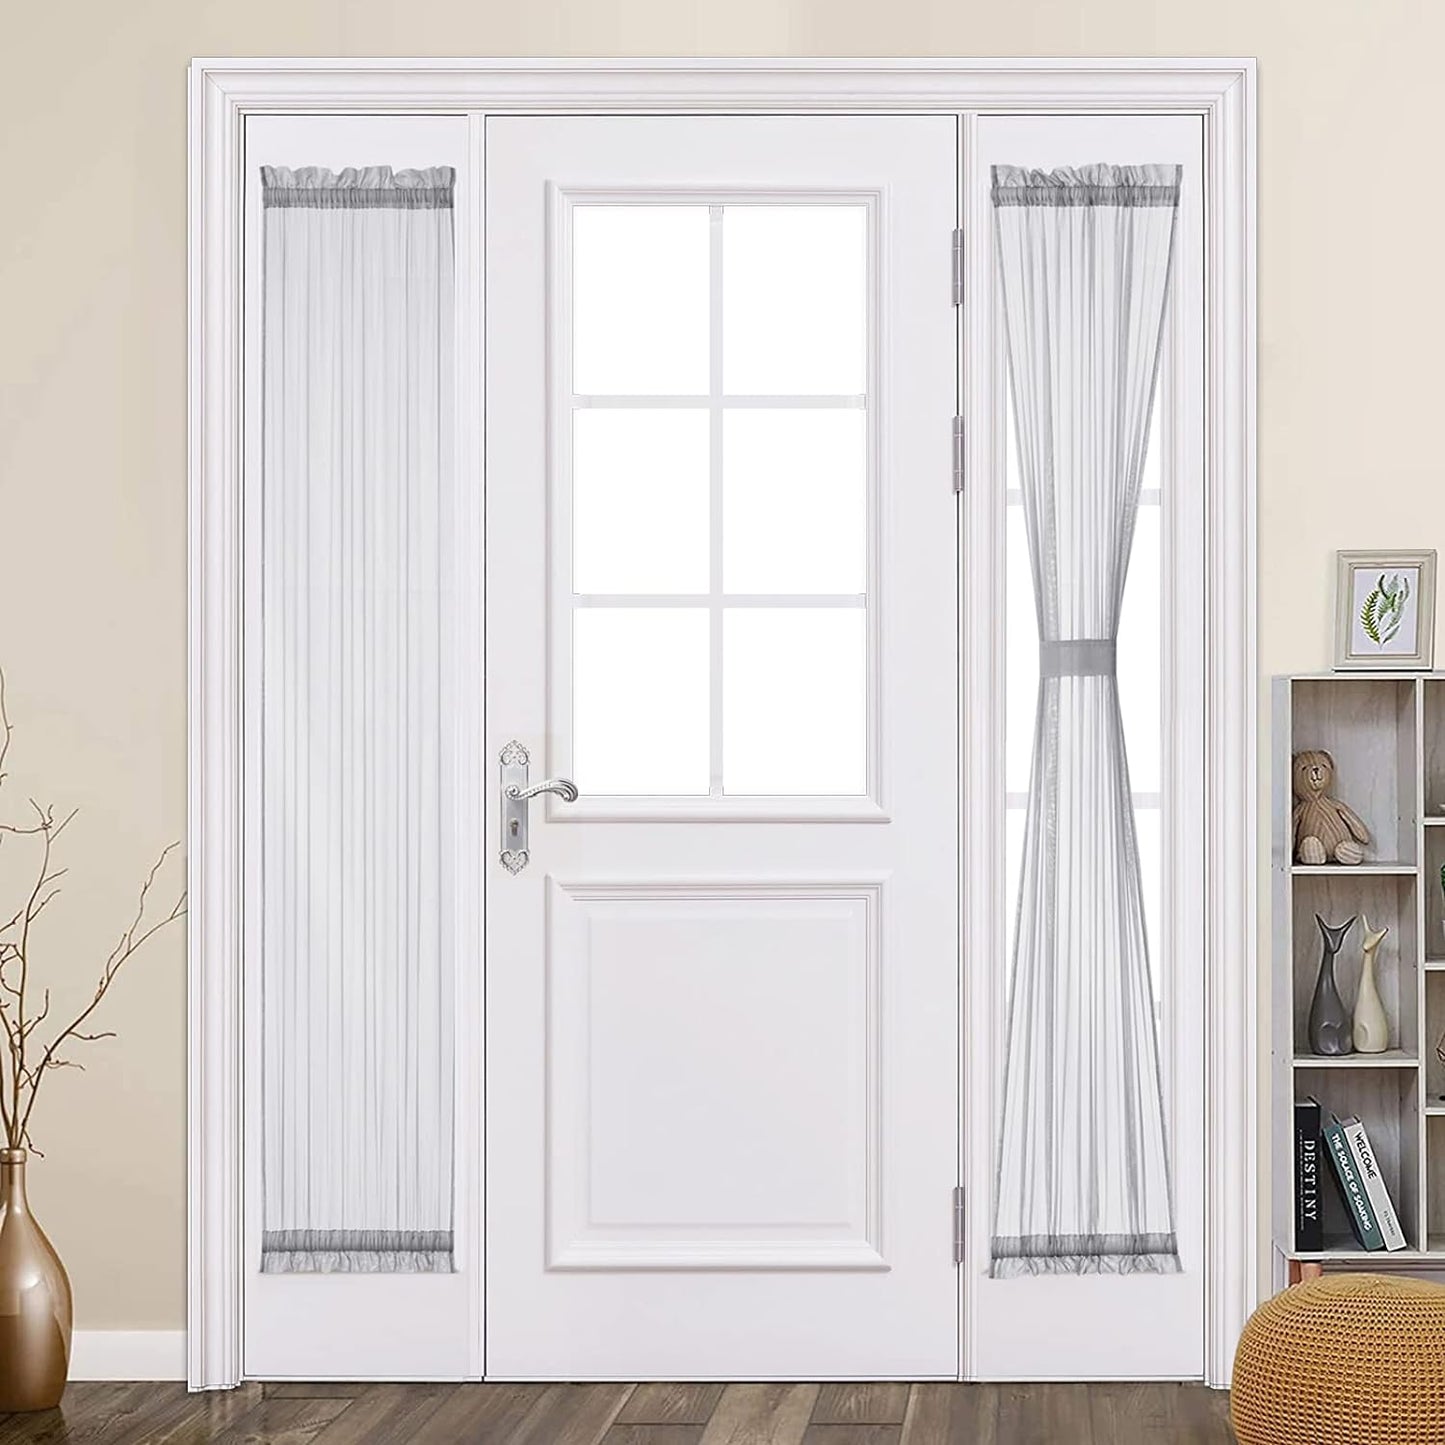 MIULEE French Door Sheer Curtains for Front Back Patio Glass Door Light Filtering Window Treatment with 2 Tiebacks 54 Wide and 72 Inches Length, White, Set of 2  MIULEE Light Grey 25"W X 72"L 